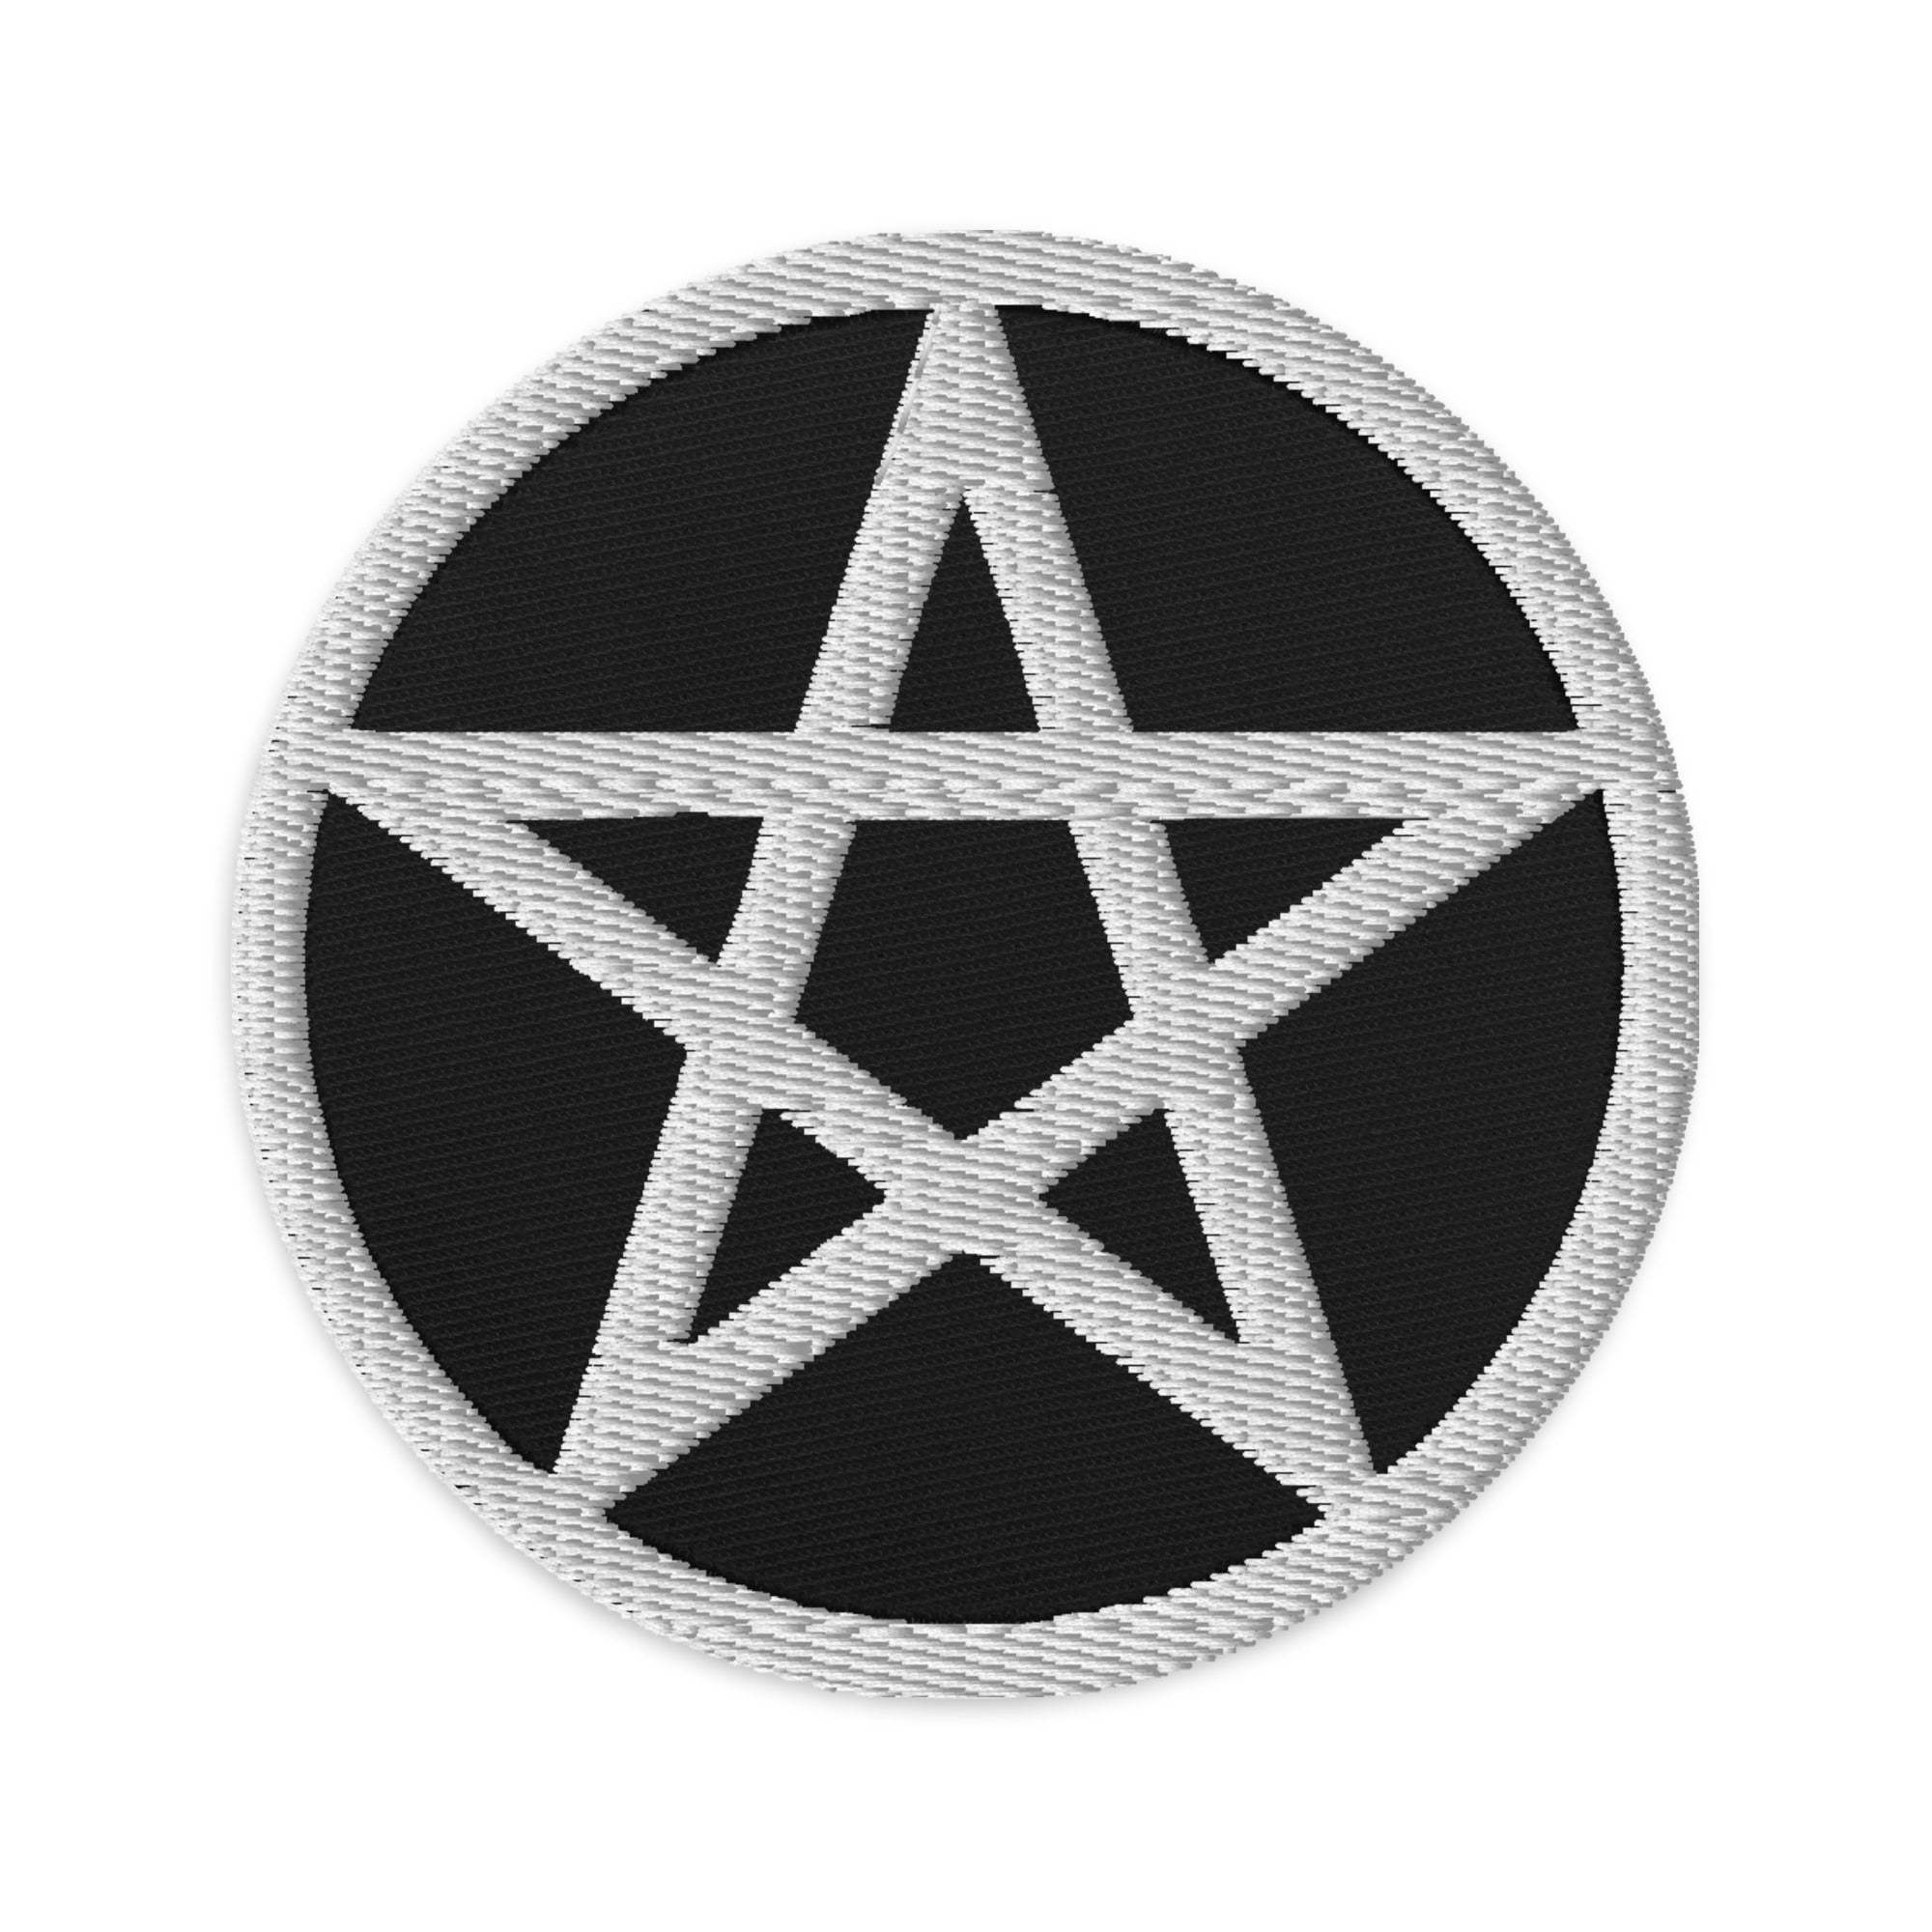 Wiccan Witchcraft Pentagram Embroidered Patch Pagan Ritual - Edge of Life Designs